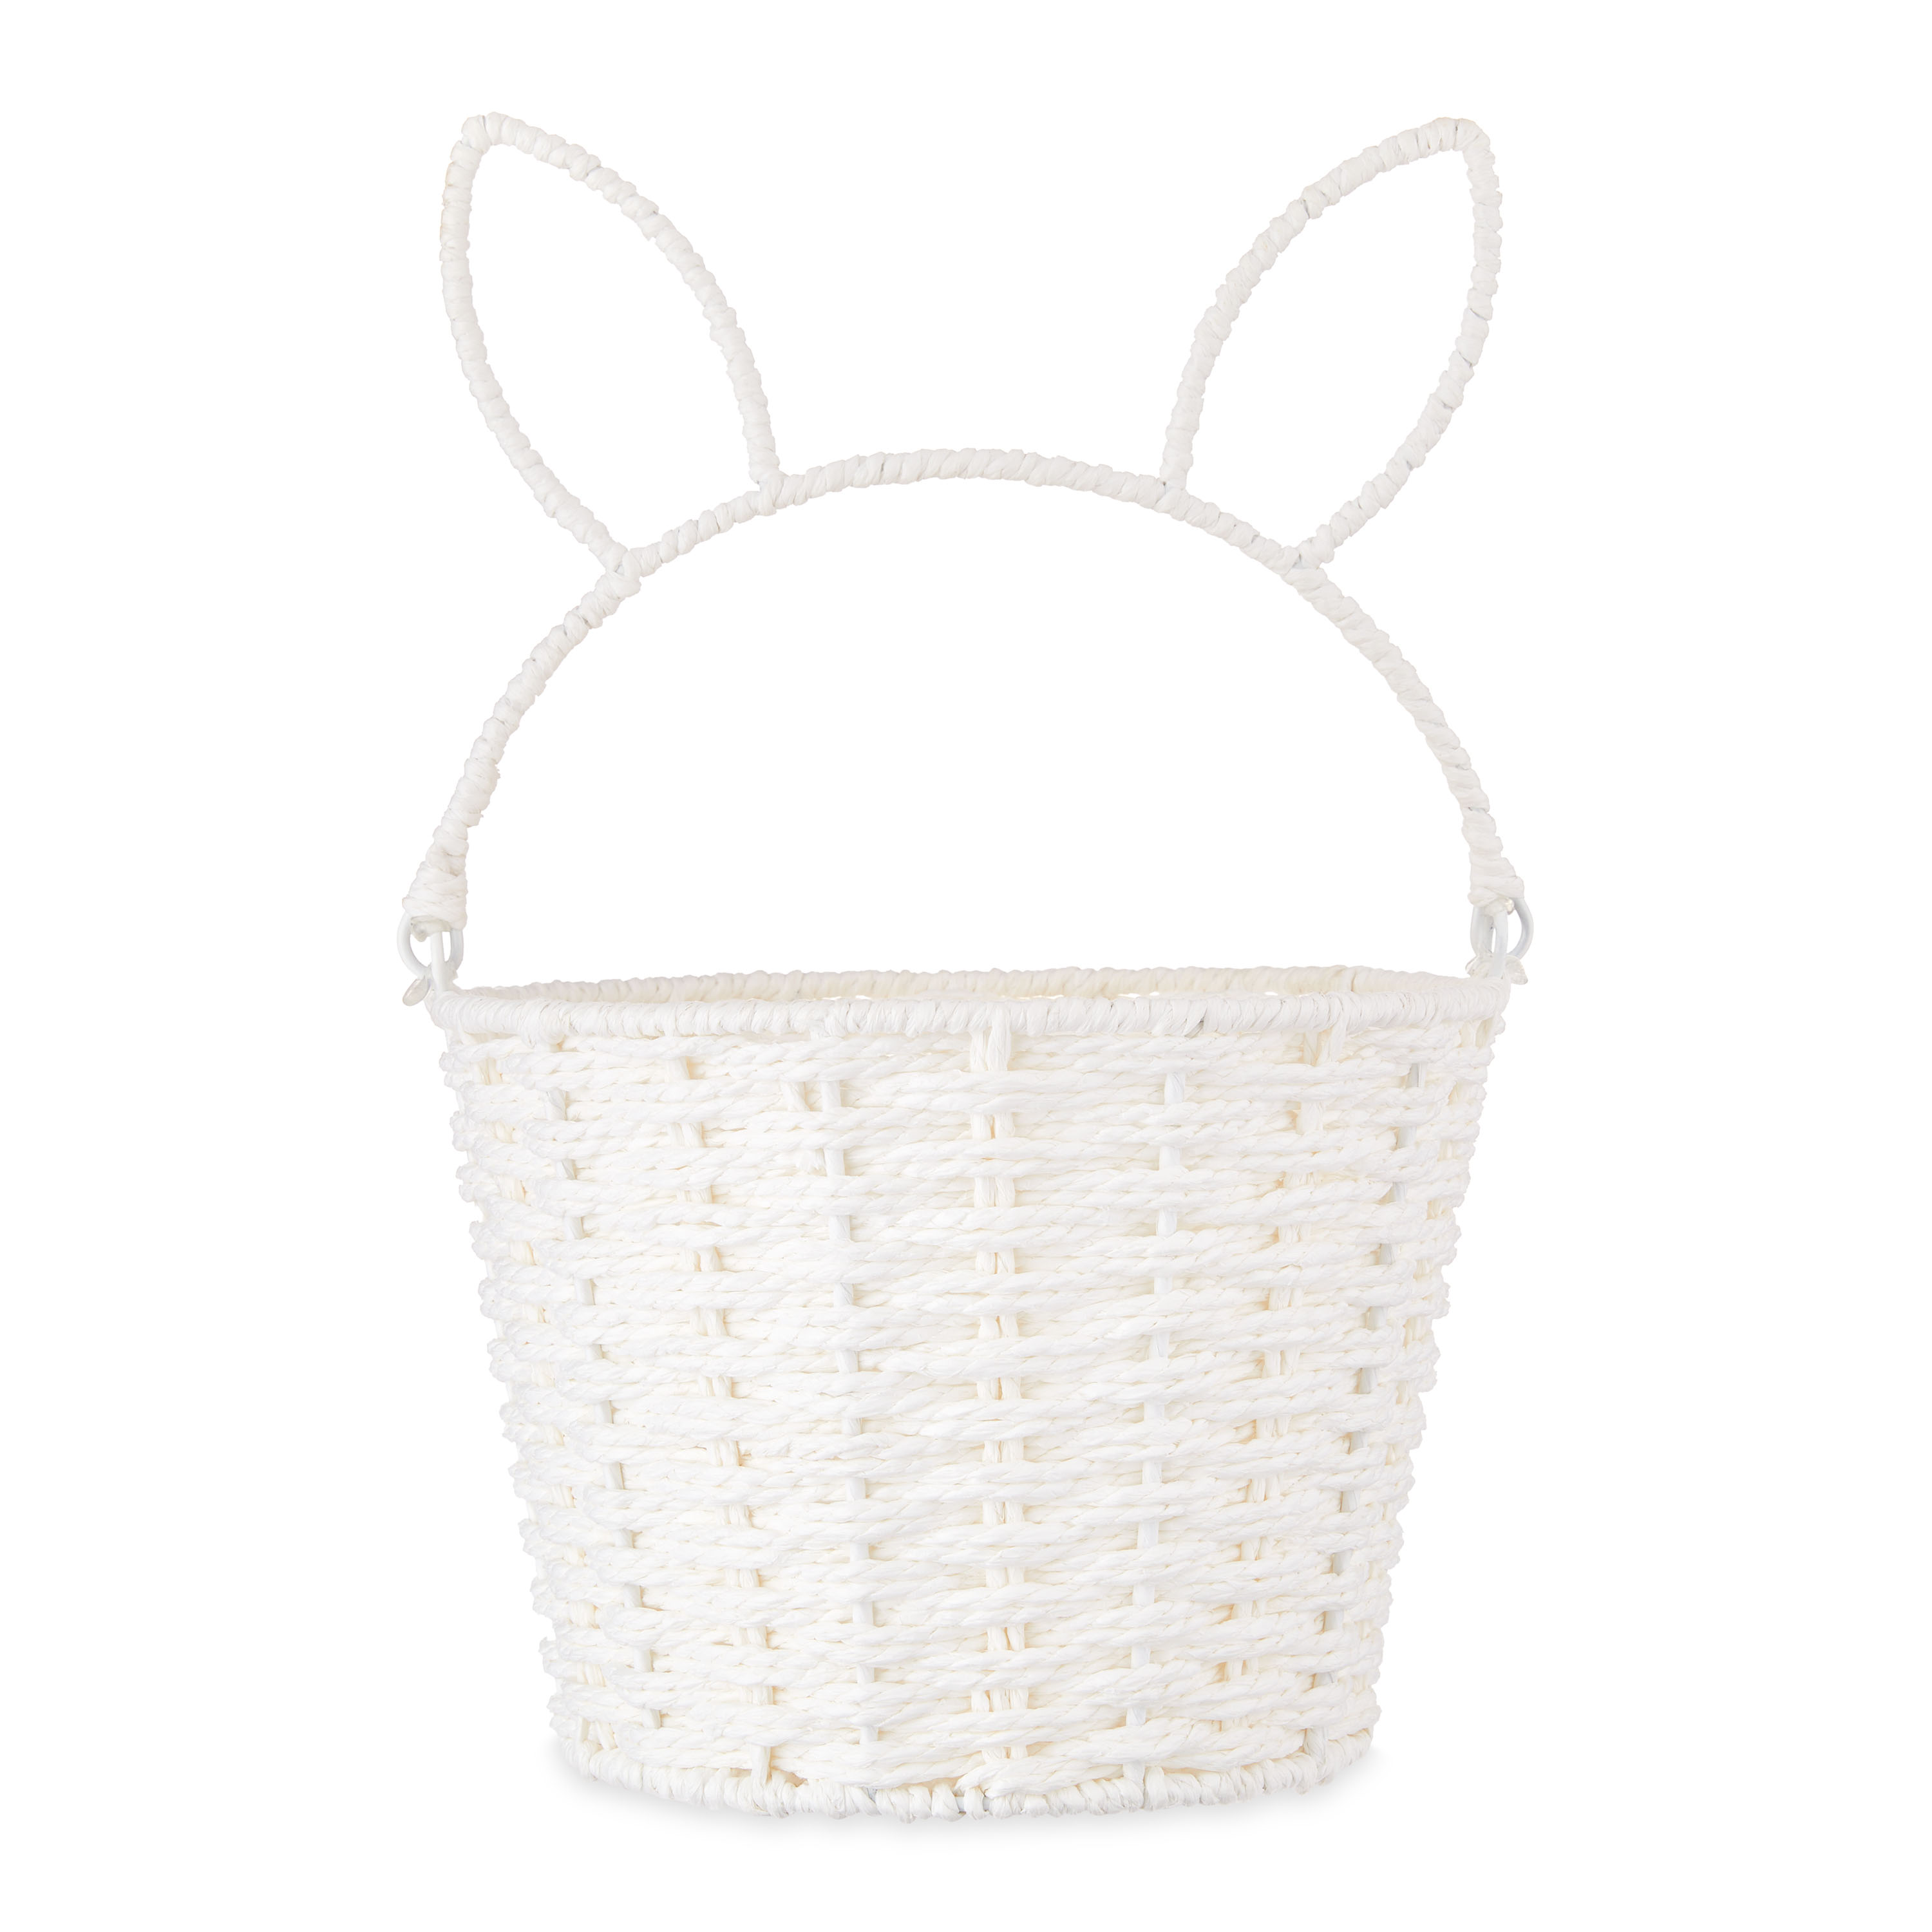 Way to Celebrate Medium Round White Paper Rope Easter Basket with Bunny Handle - image 1 of 11